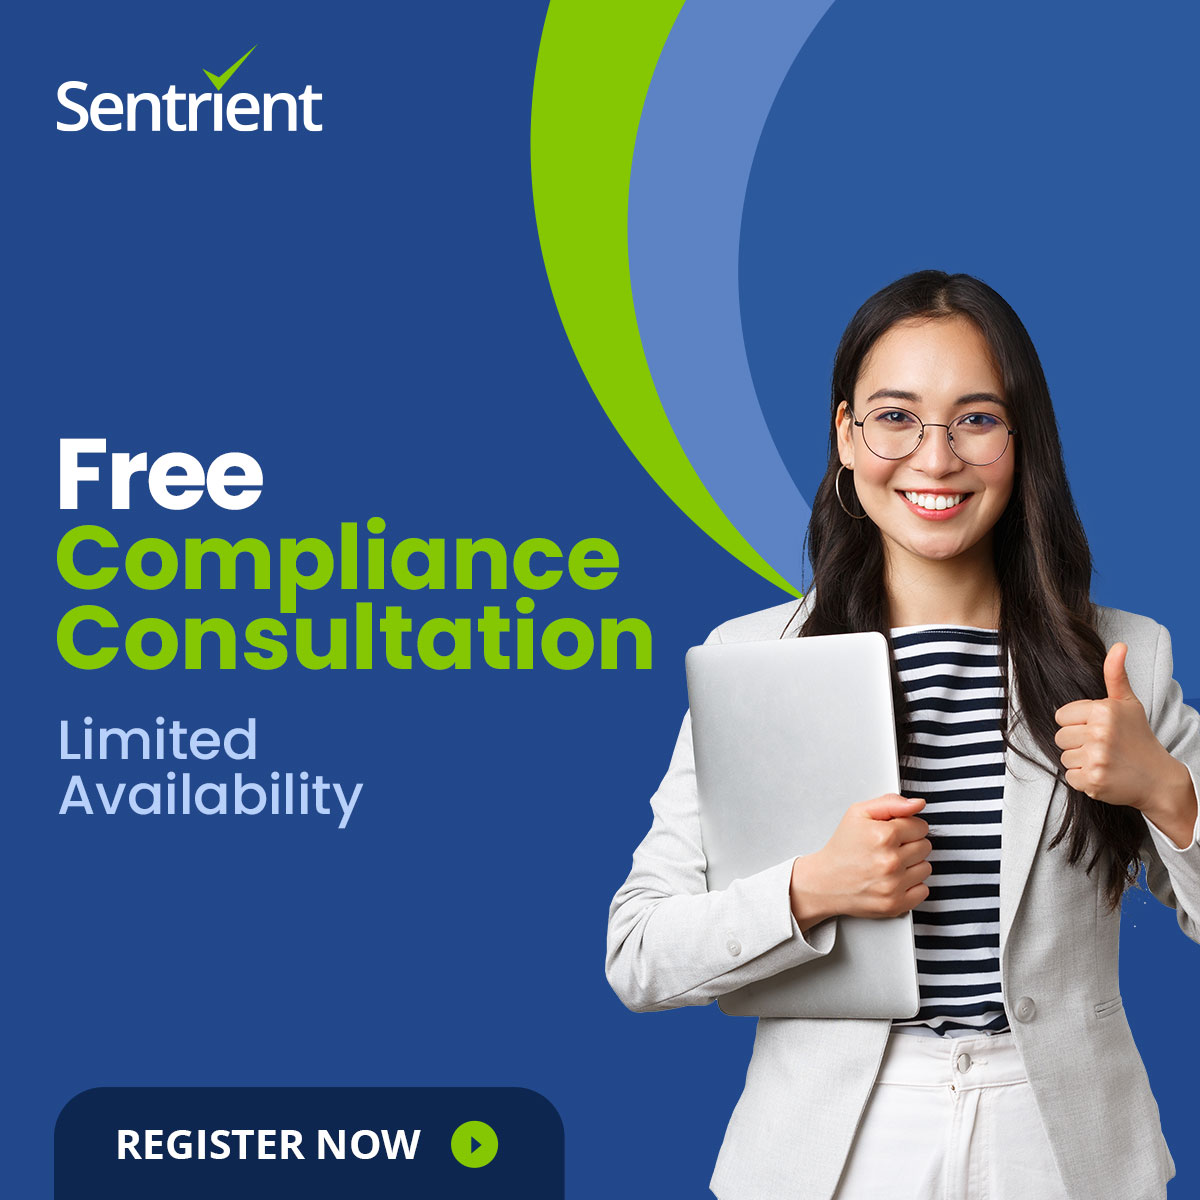 Connect with our specialists to explore tailored solutions for your organisation's needs. 

Schedule your free HR compliance consultation now: sentrient.com.au/meeting-your-l…

#compliancesolutions #compliancemanagement #compliancetraining #regulatorycompliance #Sentrient